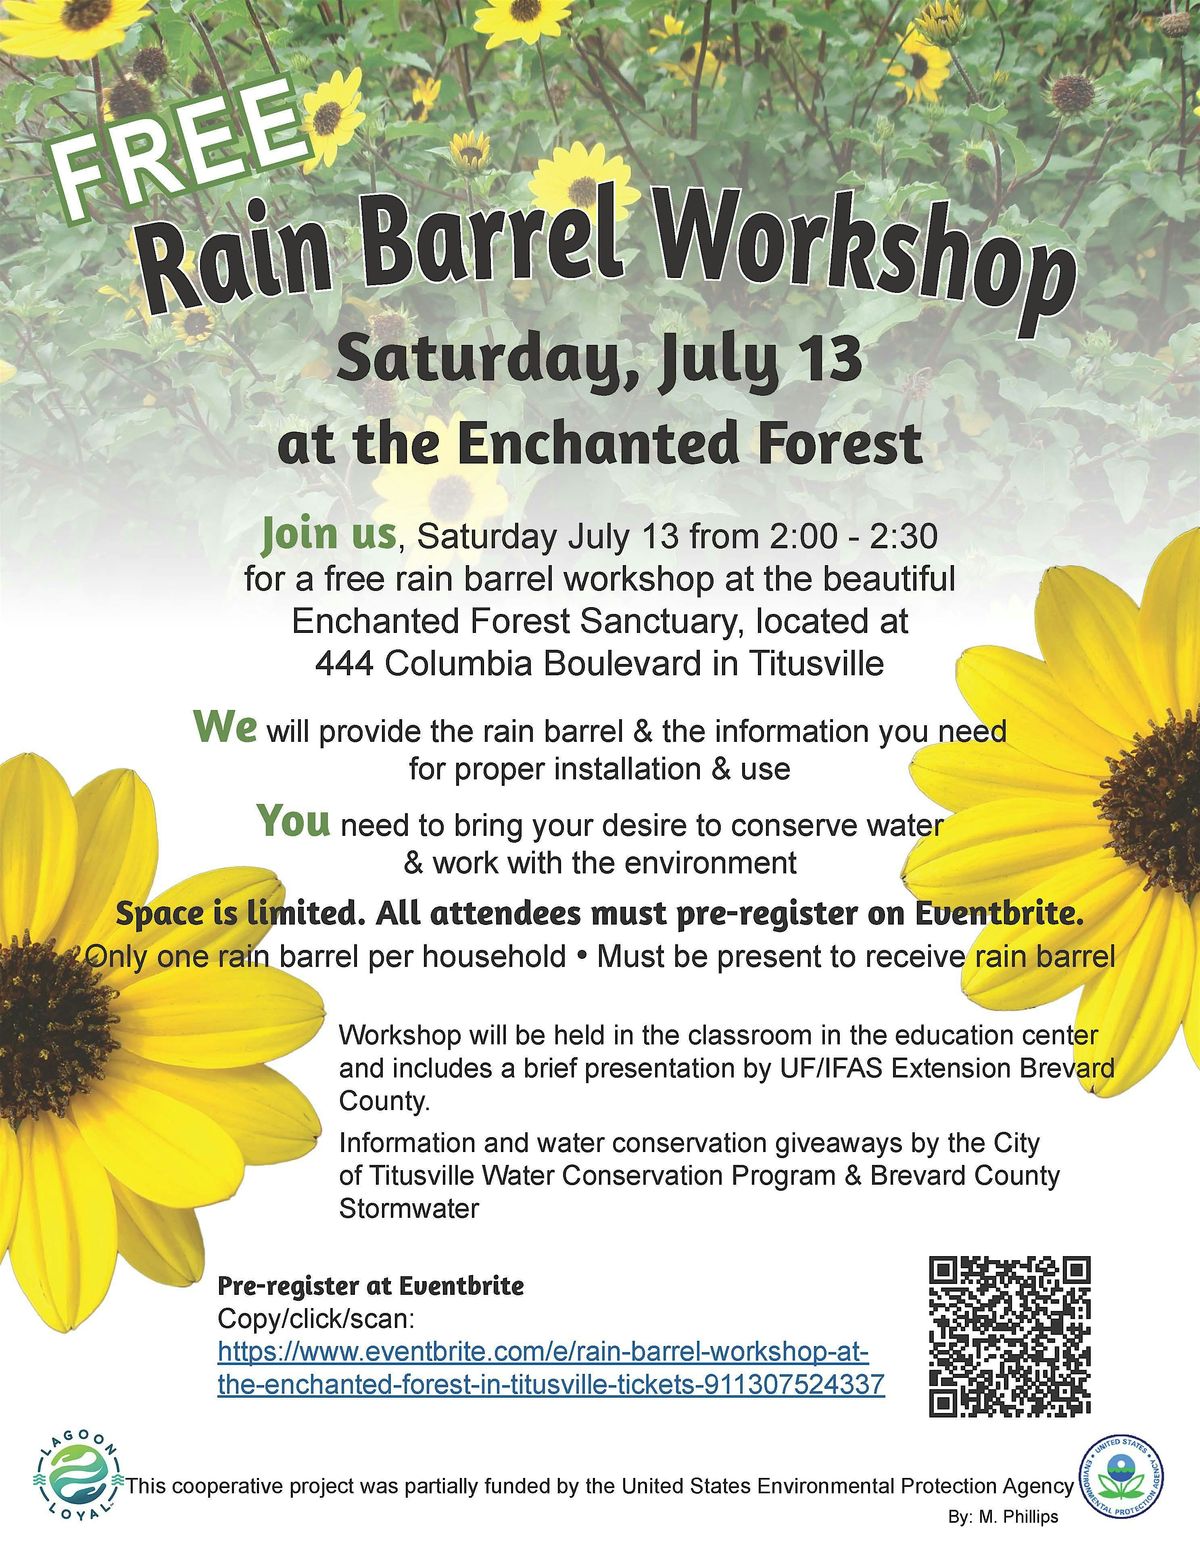 Rain Barrel Workshop at the Enchanted Forest in Titusville